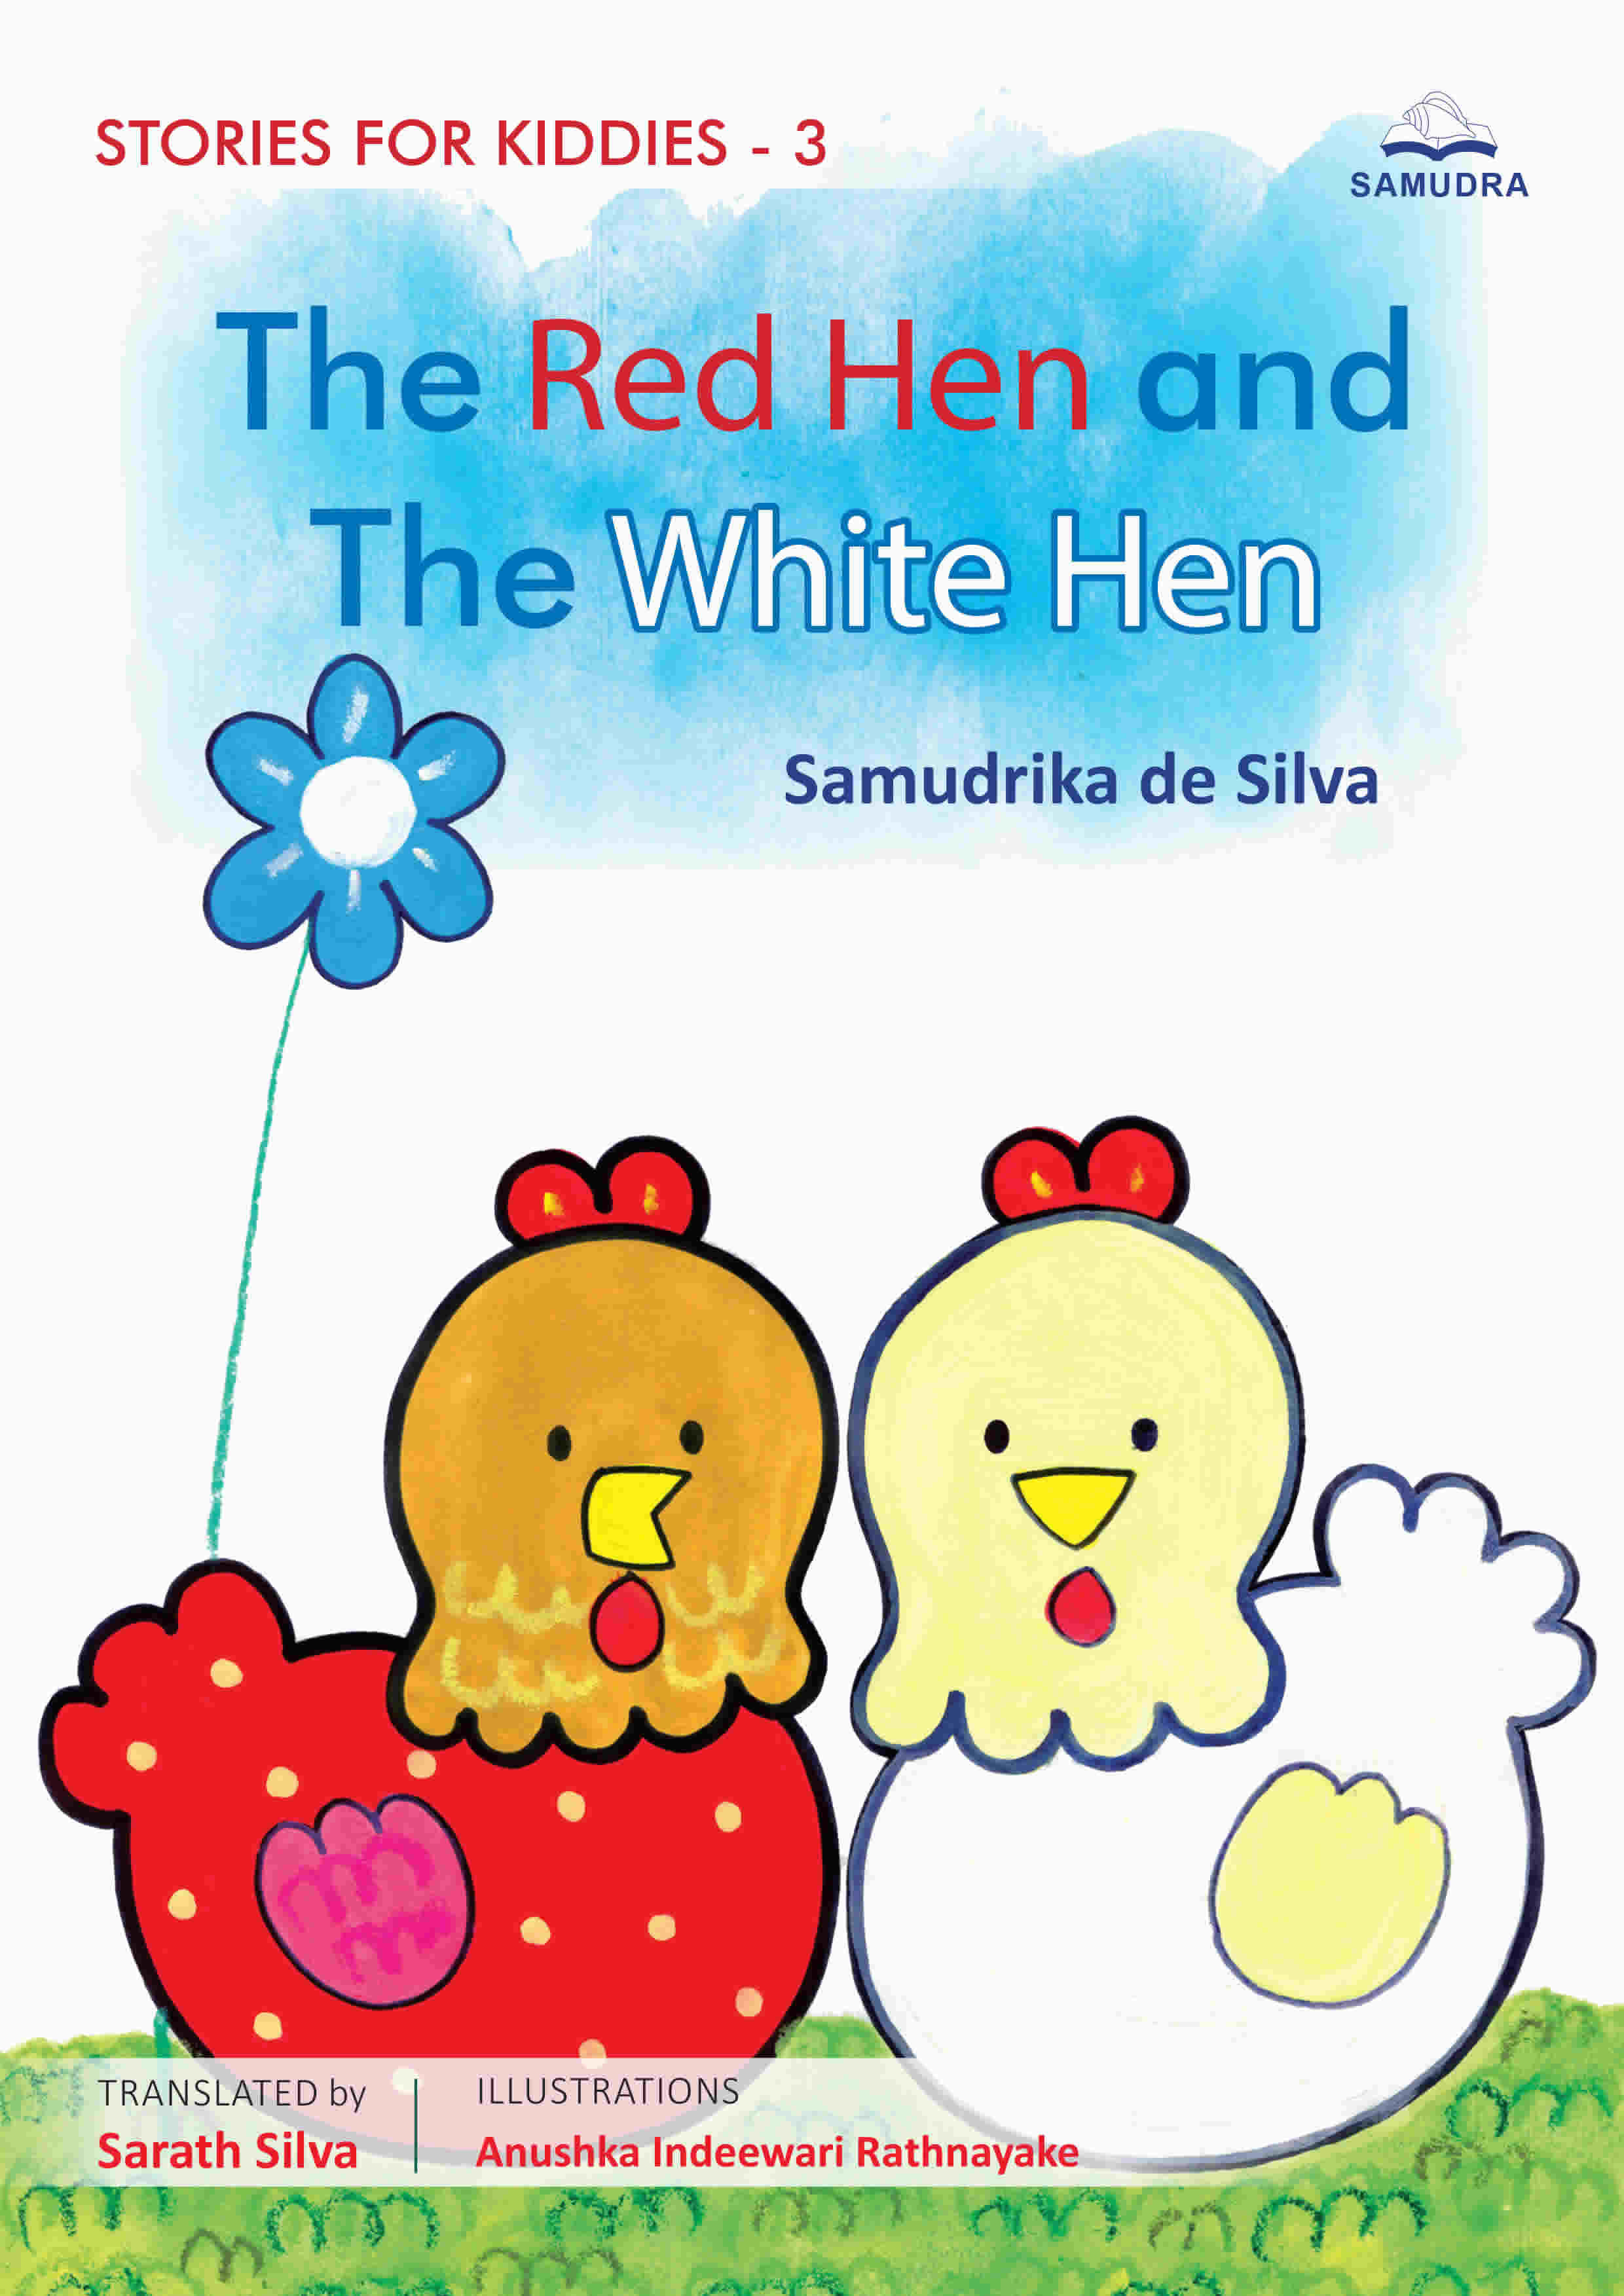 The Red Hen and The White Hen